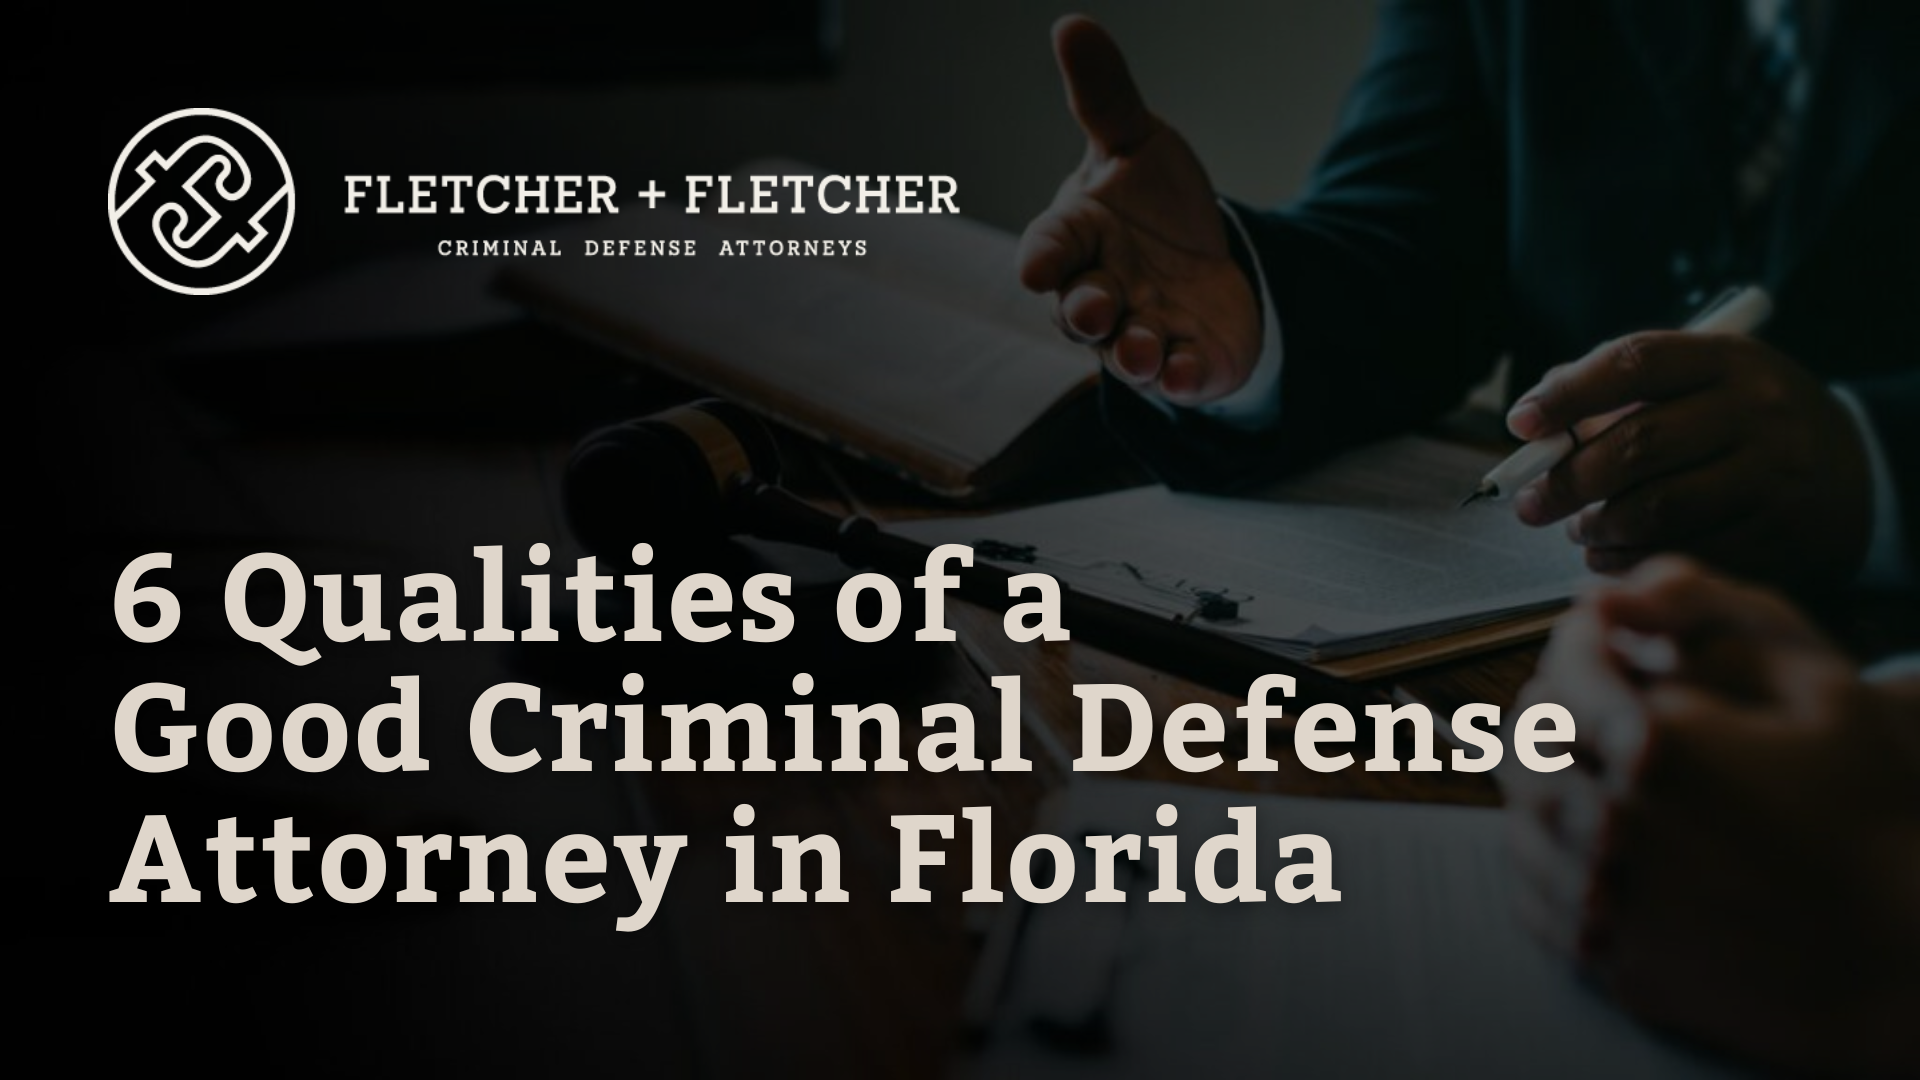 Qualities of a Good Criminal Defense Attorney in Florida - Fletcher Fletcher Florida criminal defense lawyers